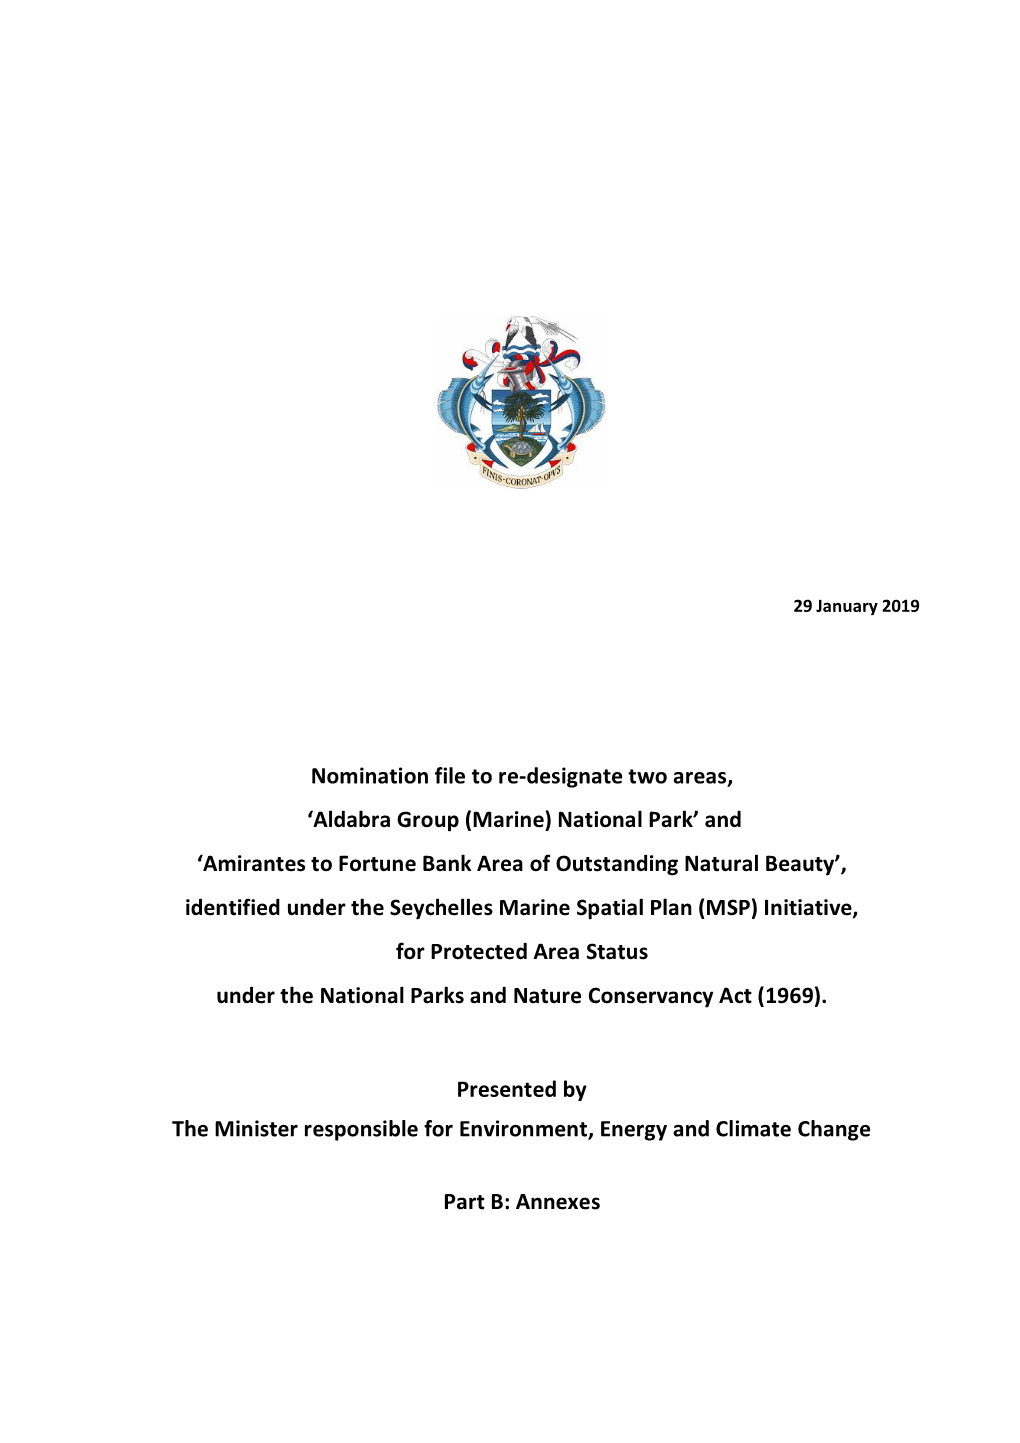 Nomination File to Re-Designate Two Areas, 'Aldabra Group (Marine) National Park' and 'Amirantes to Fortune Bank Area Of